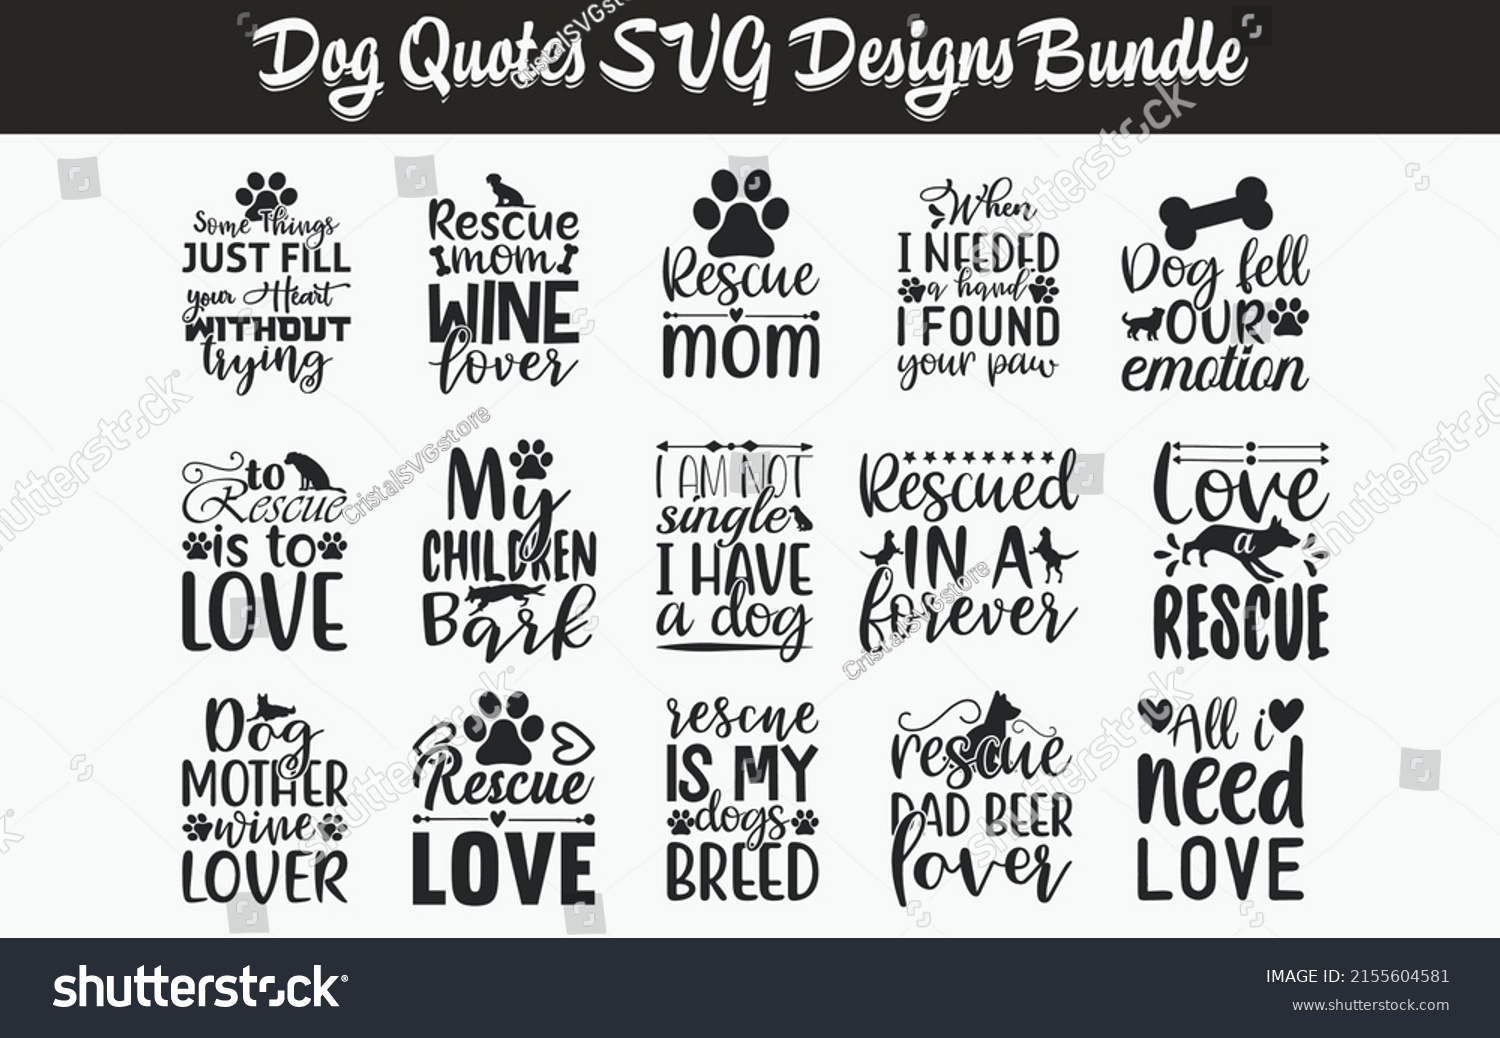 SVG of Dog Quotes SVG Cut Files Designs Bundle, Dog quotes SVG cut files, doggy quotes t shirt designs, Saying about doggy, Dog cut files, Canine quotes eps files, Saying of Pooch, svg